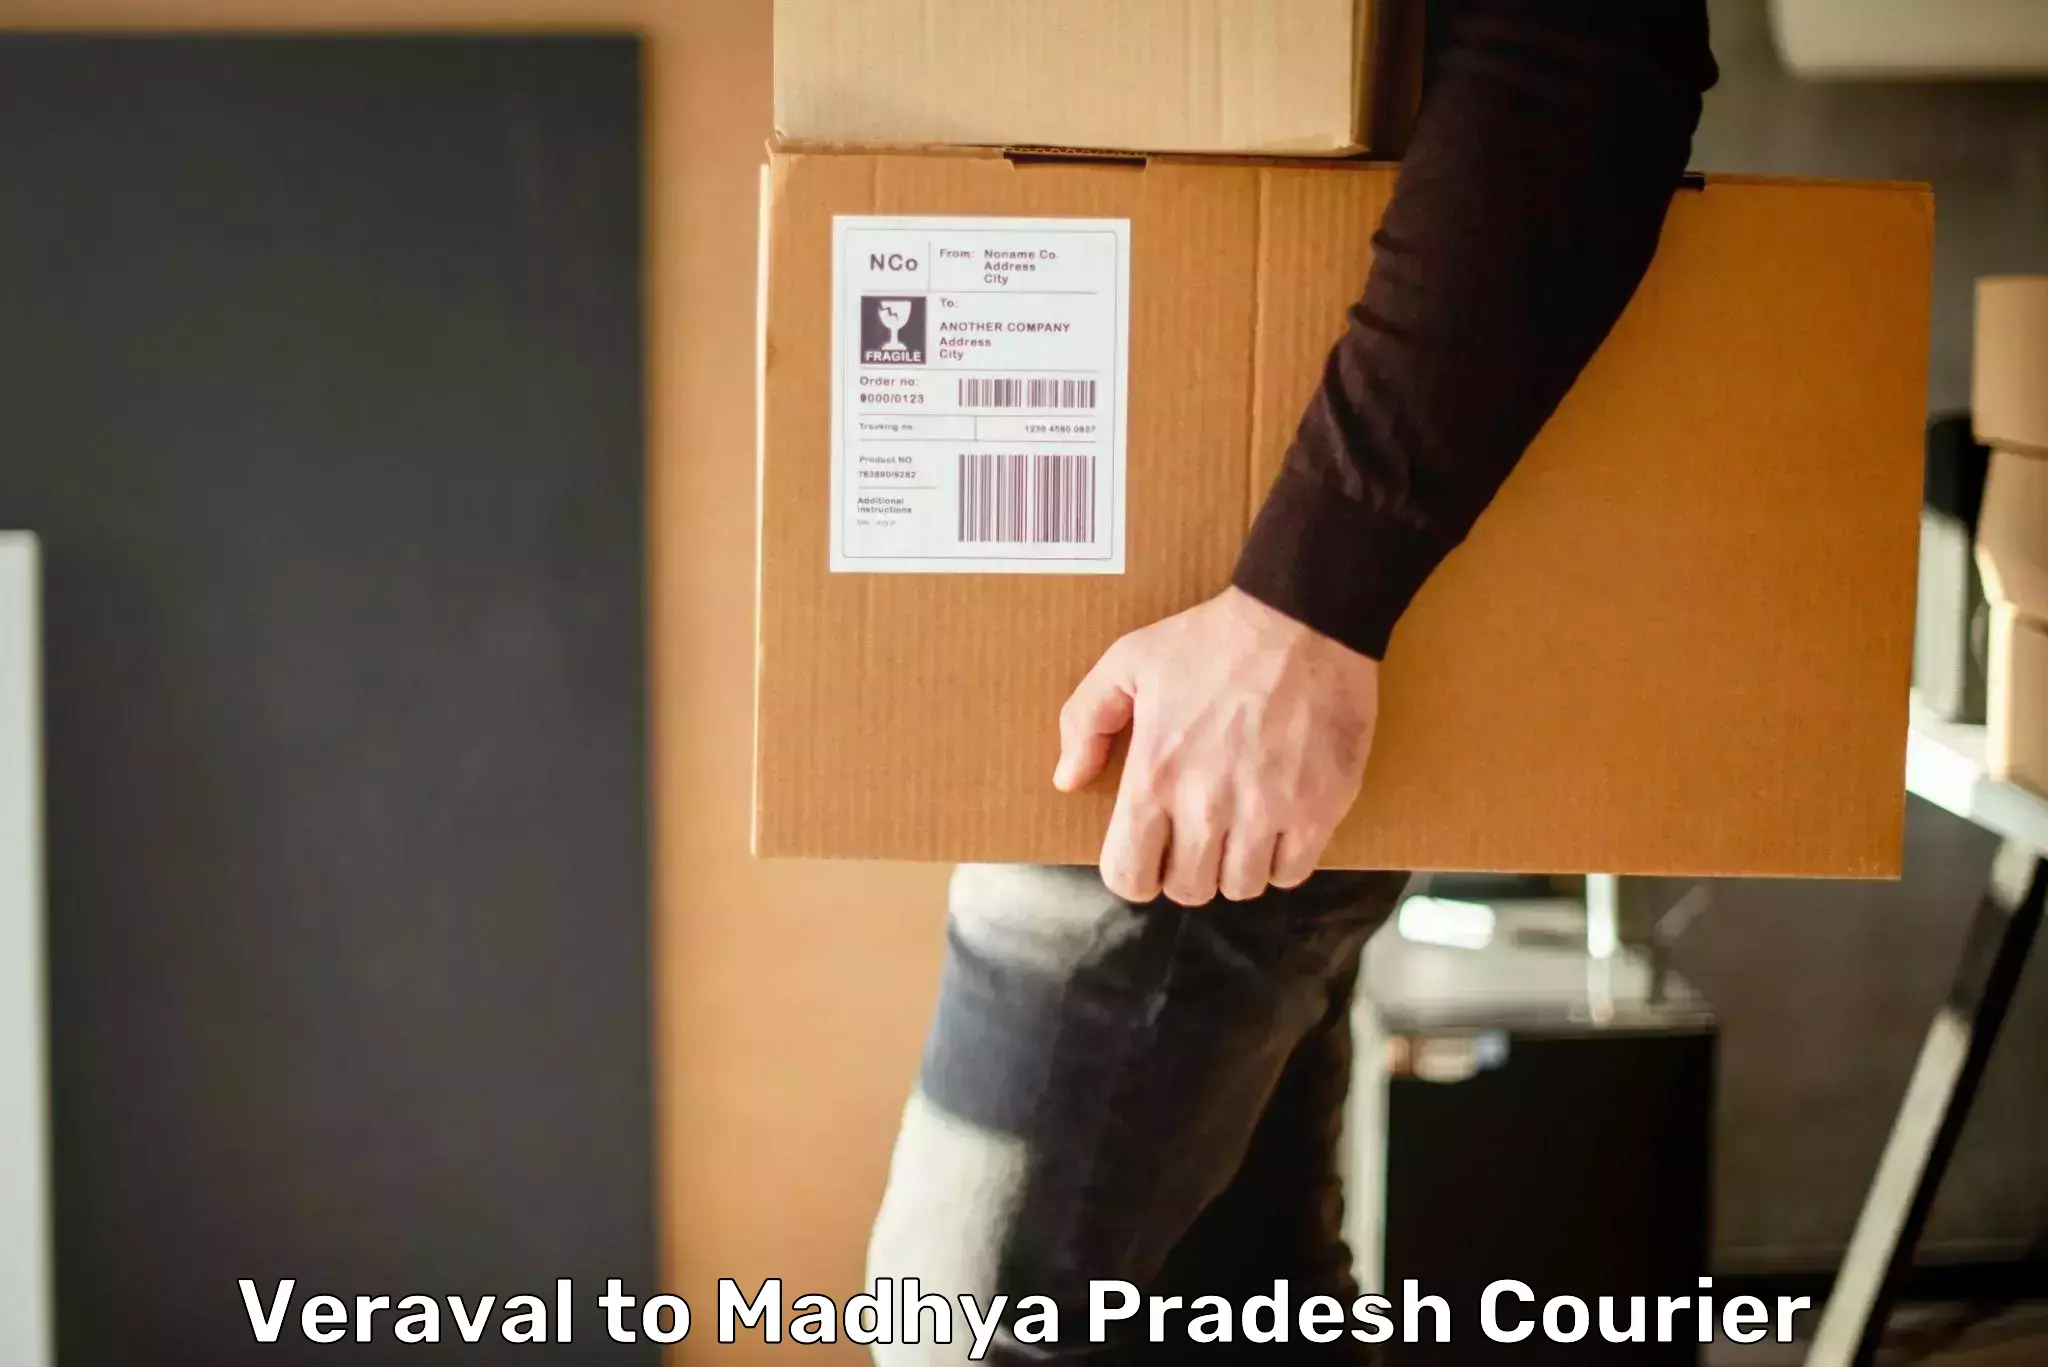 Global courier networks Veraval to Churhat